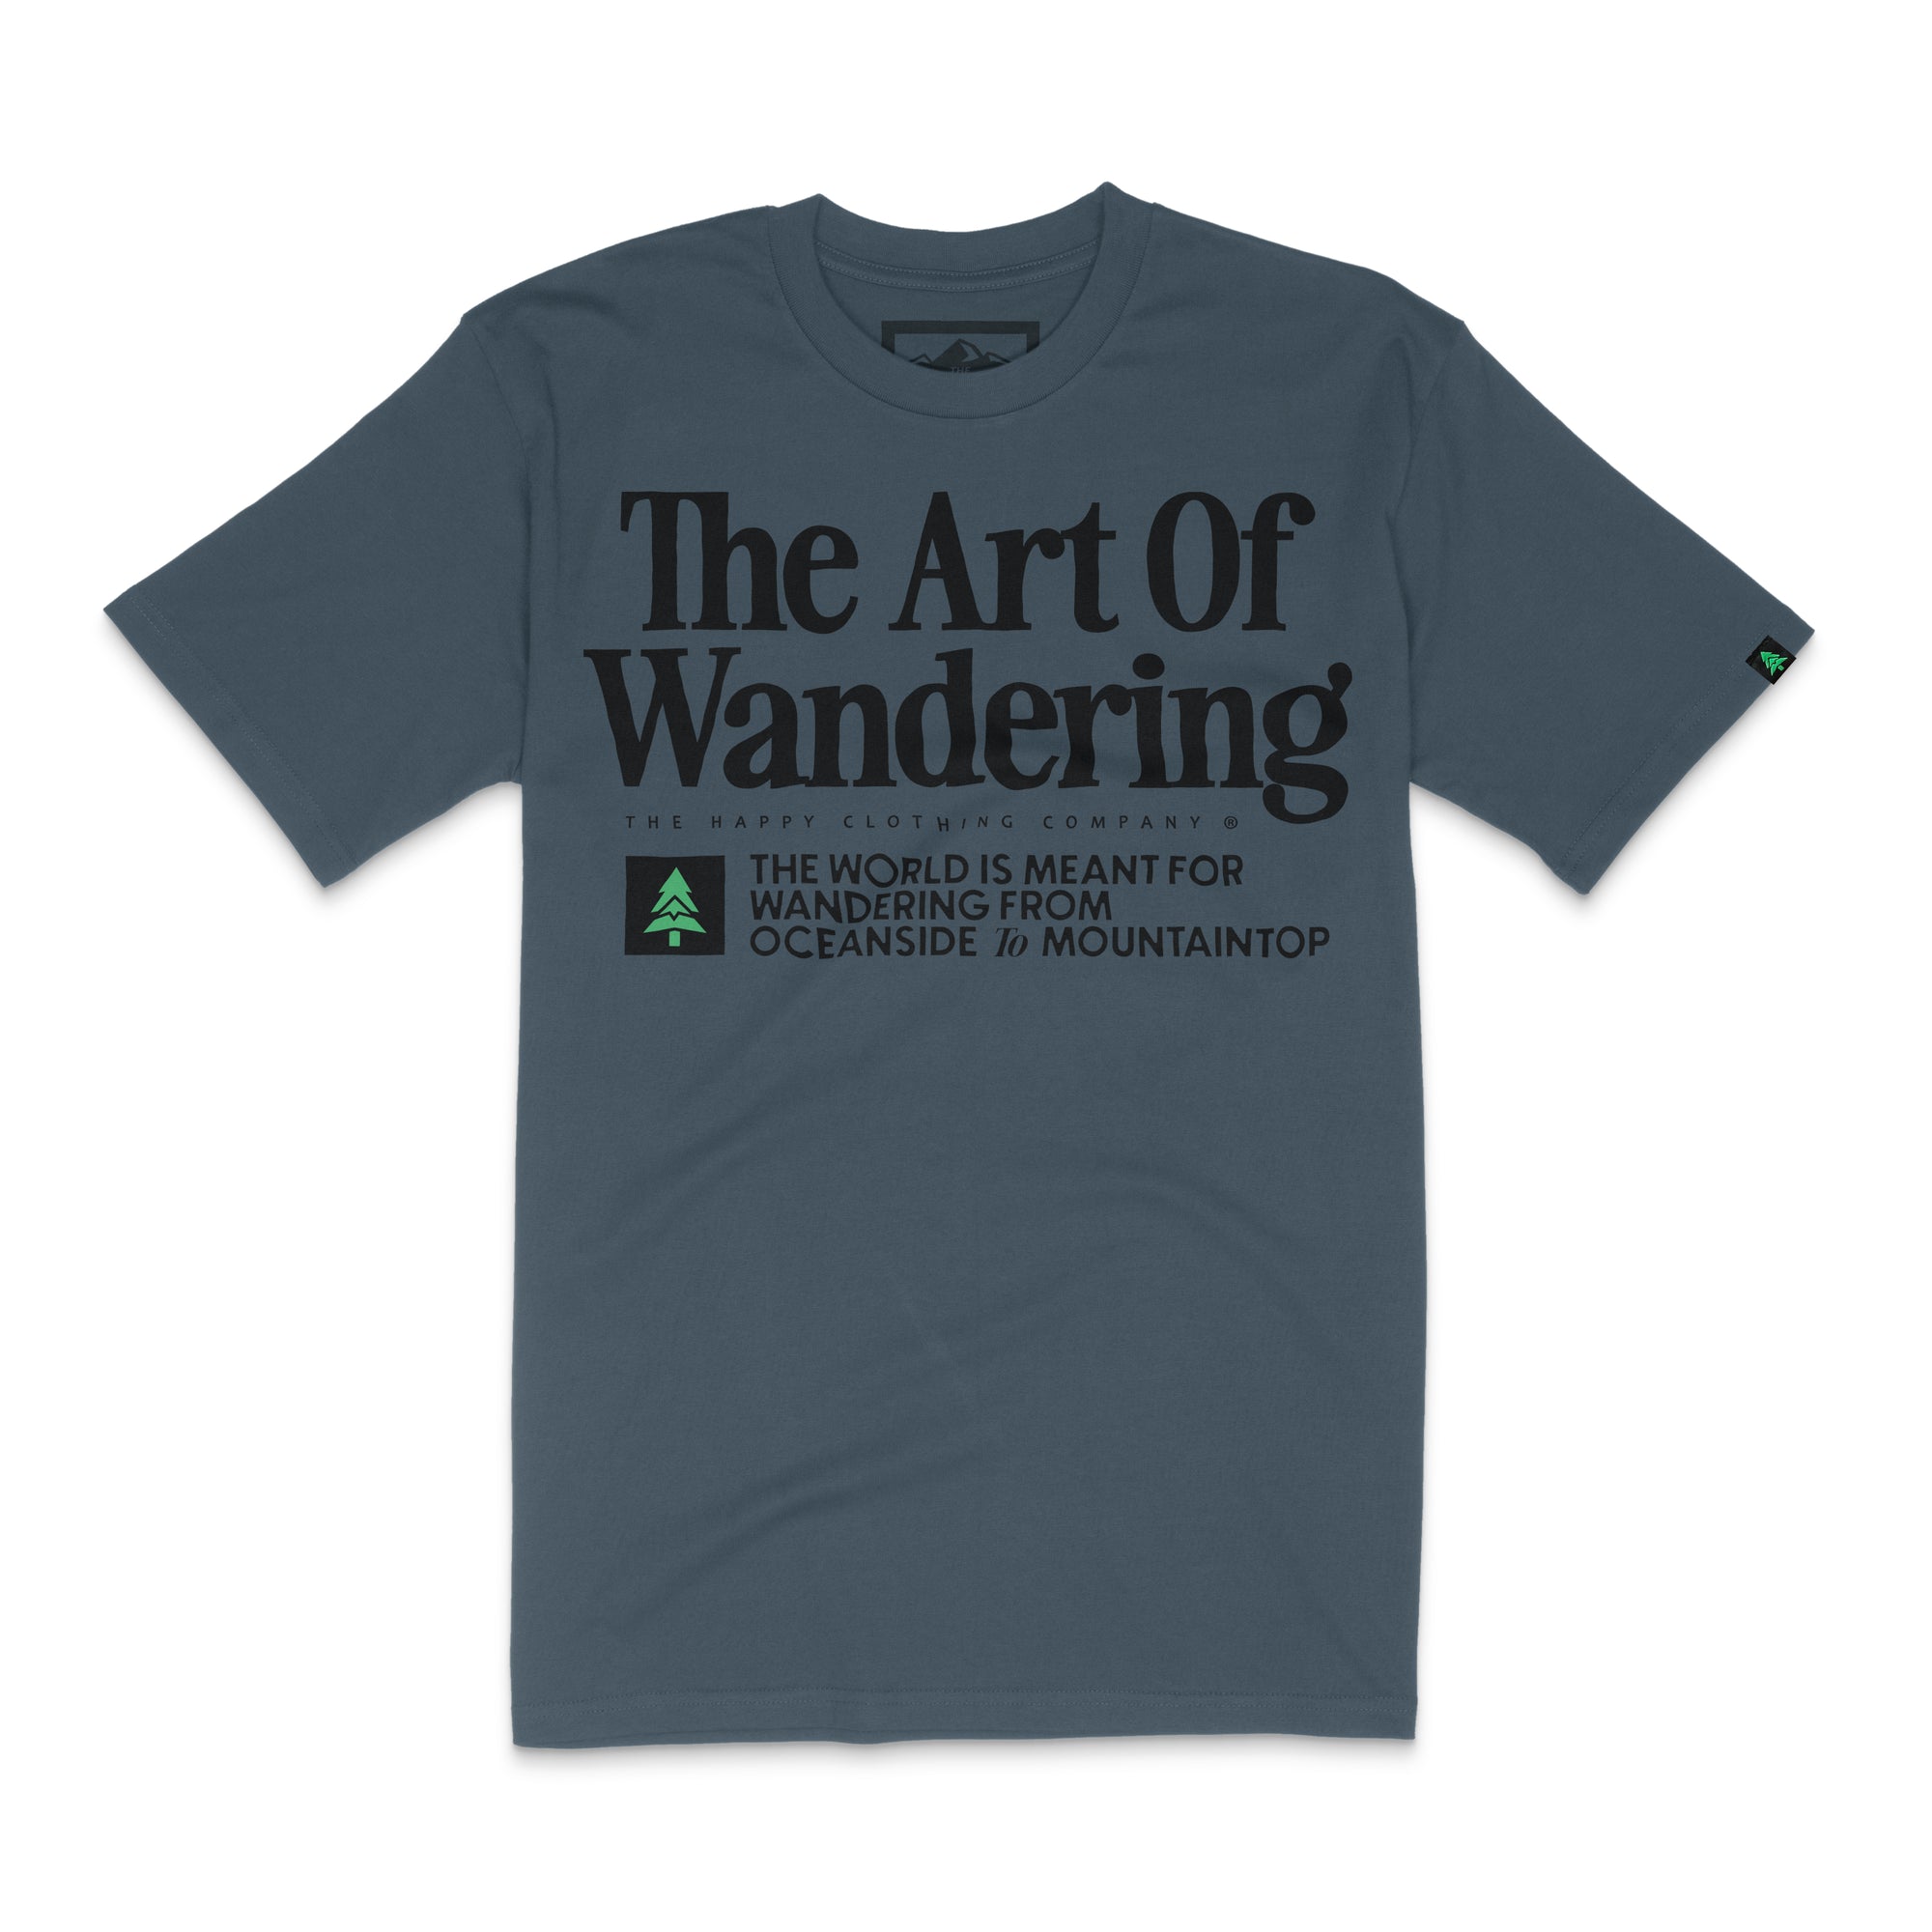 The Art Of Wandering Cotton Tee | Peaks & Pines Edition |